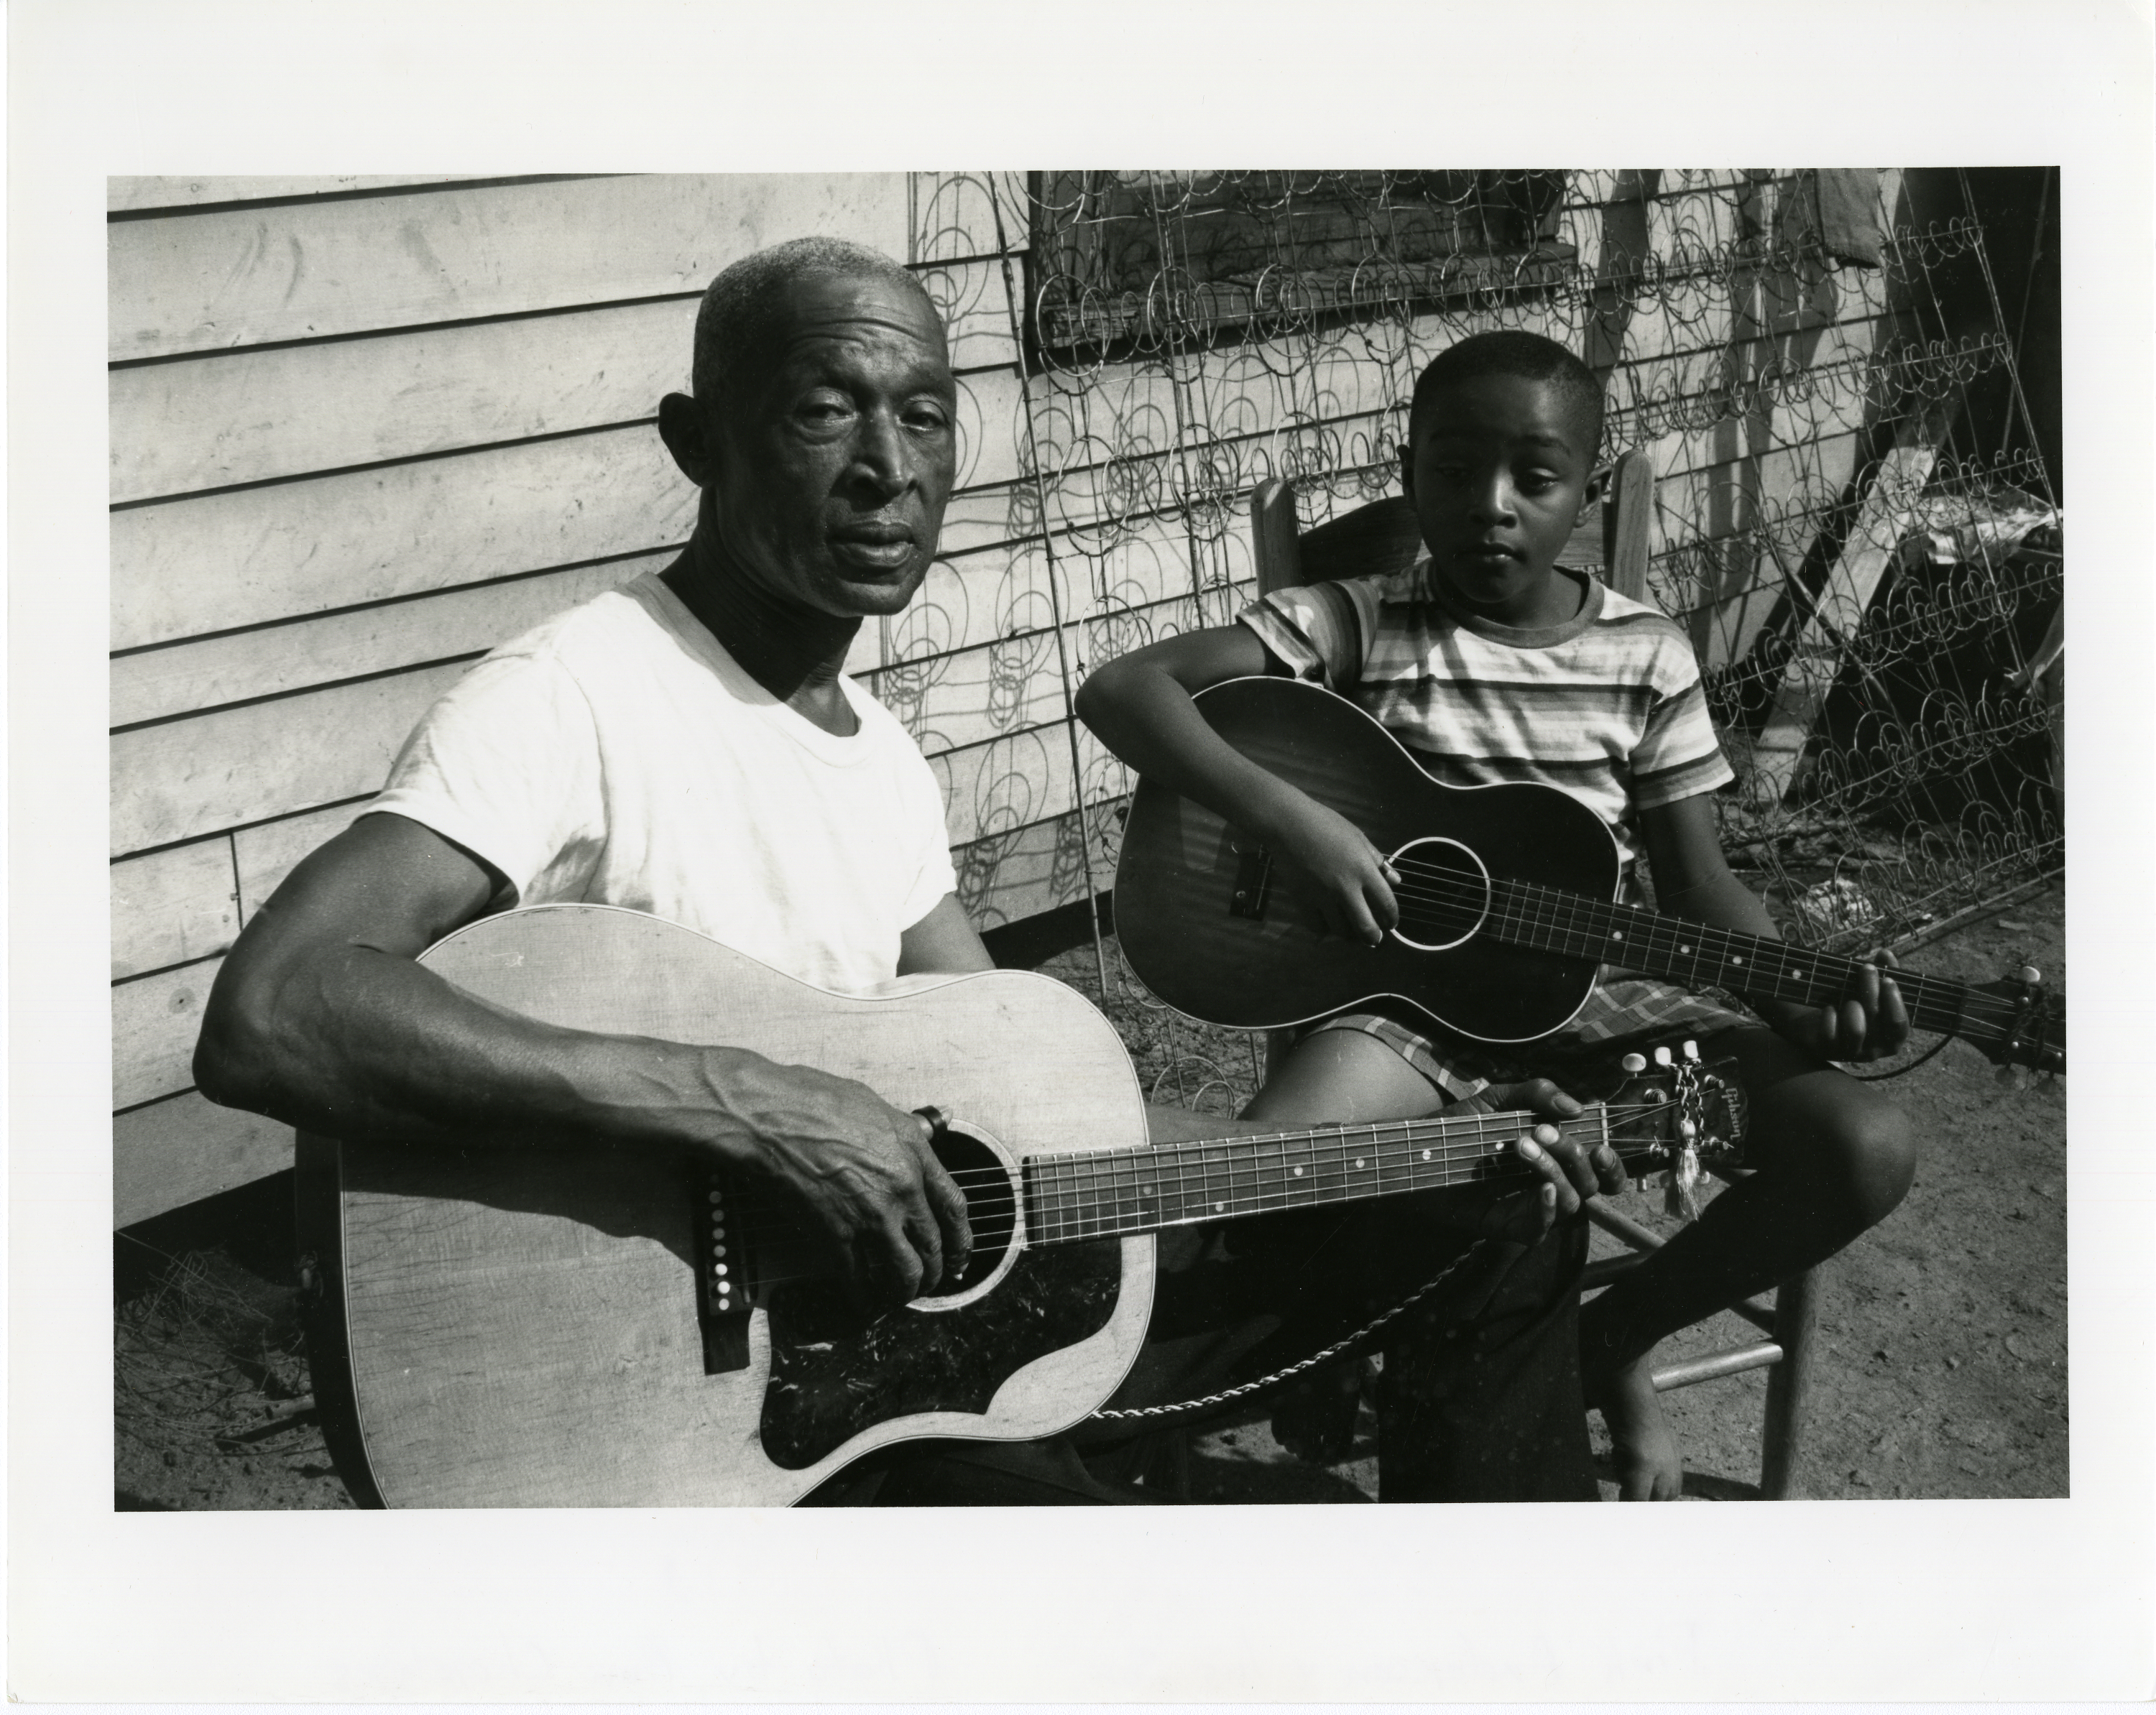 Pinkney “Pink” Anderson with his son Alvin, known as “Little Pink,” at their South Carolina home in 1962 when they appeared in the film “The Blues,” made by Samuel and Ann Charters.